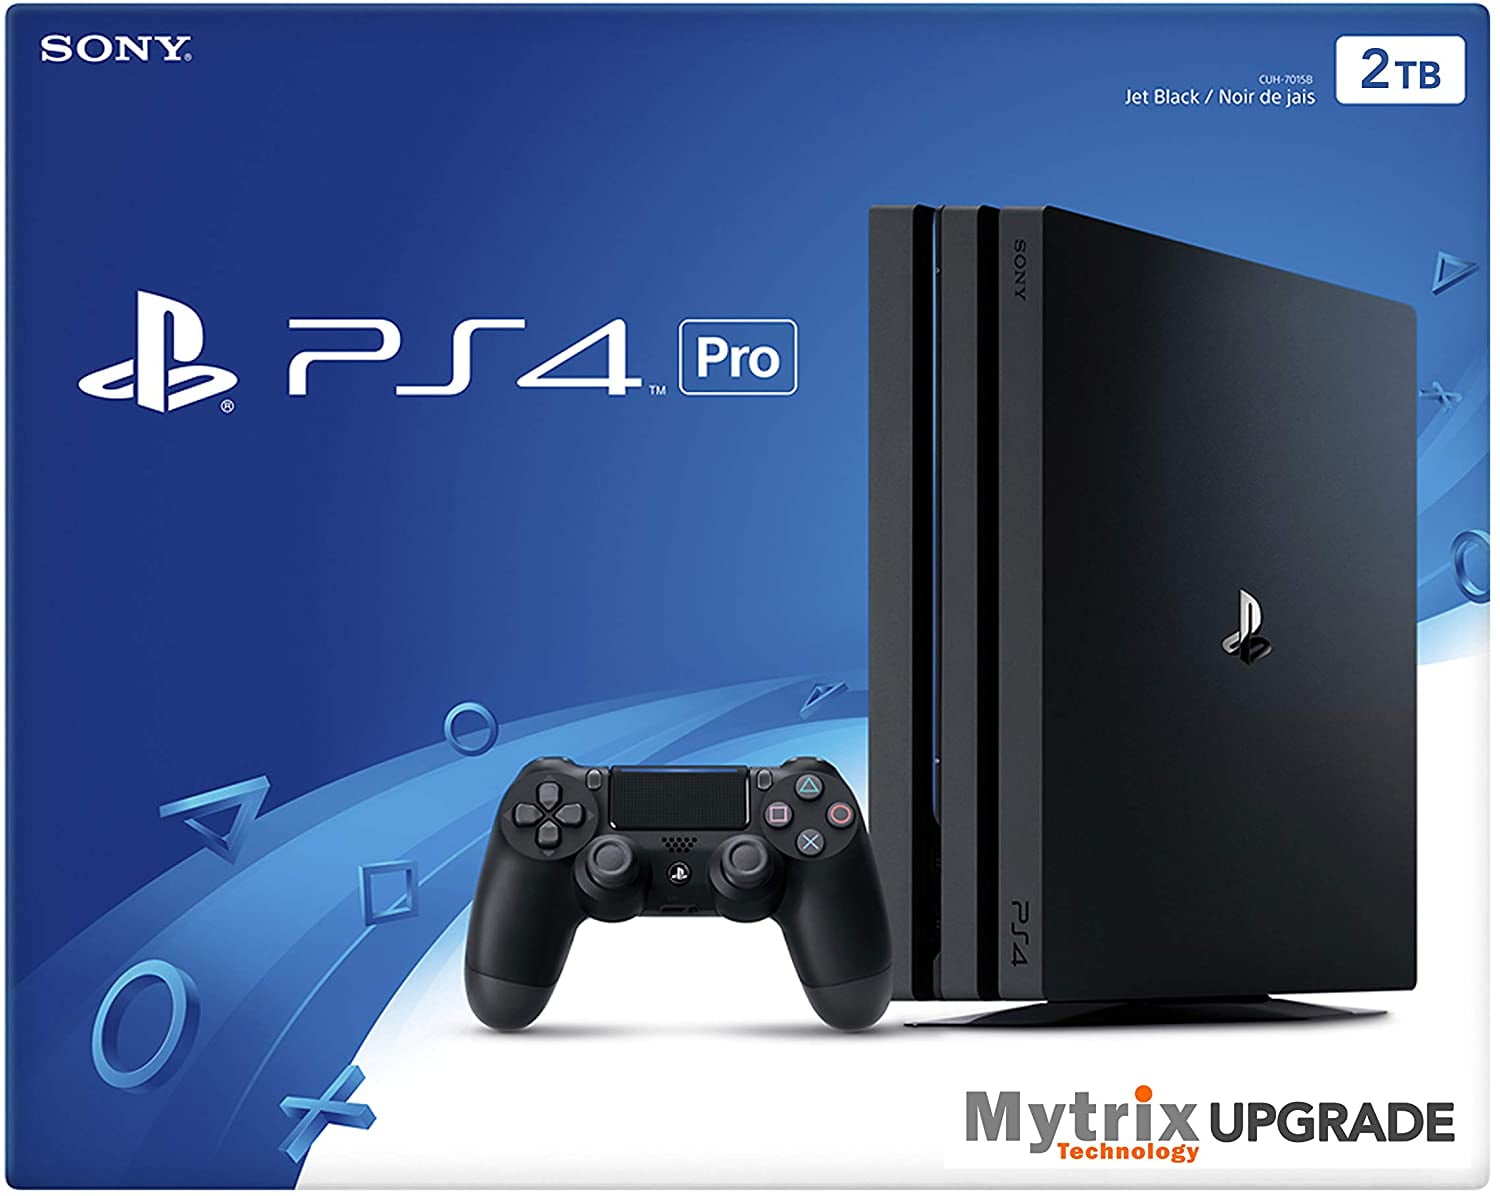 Mytrix Playstation 4 Pro 2TB Console with DualShock 4 Wireless 